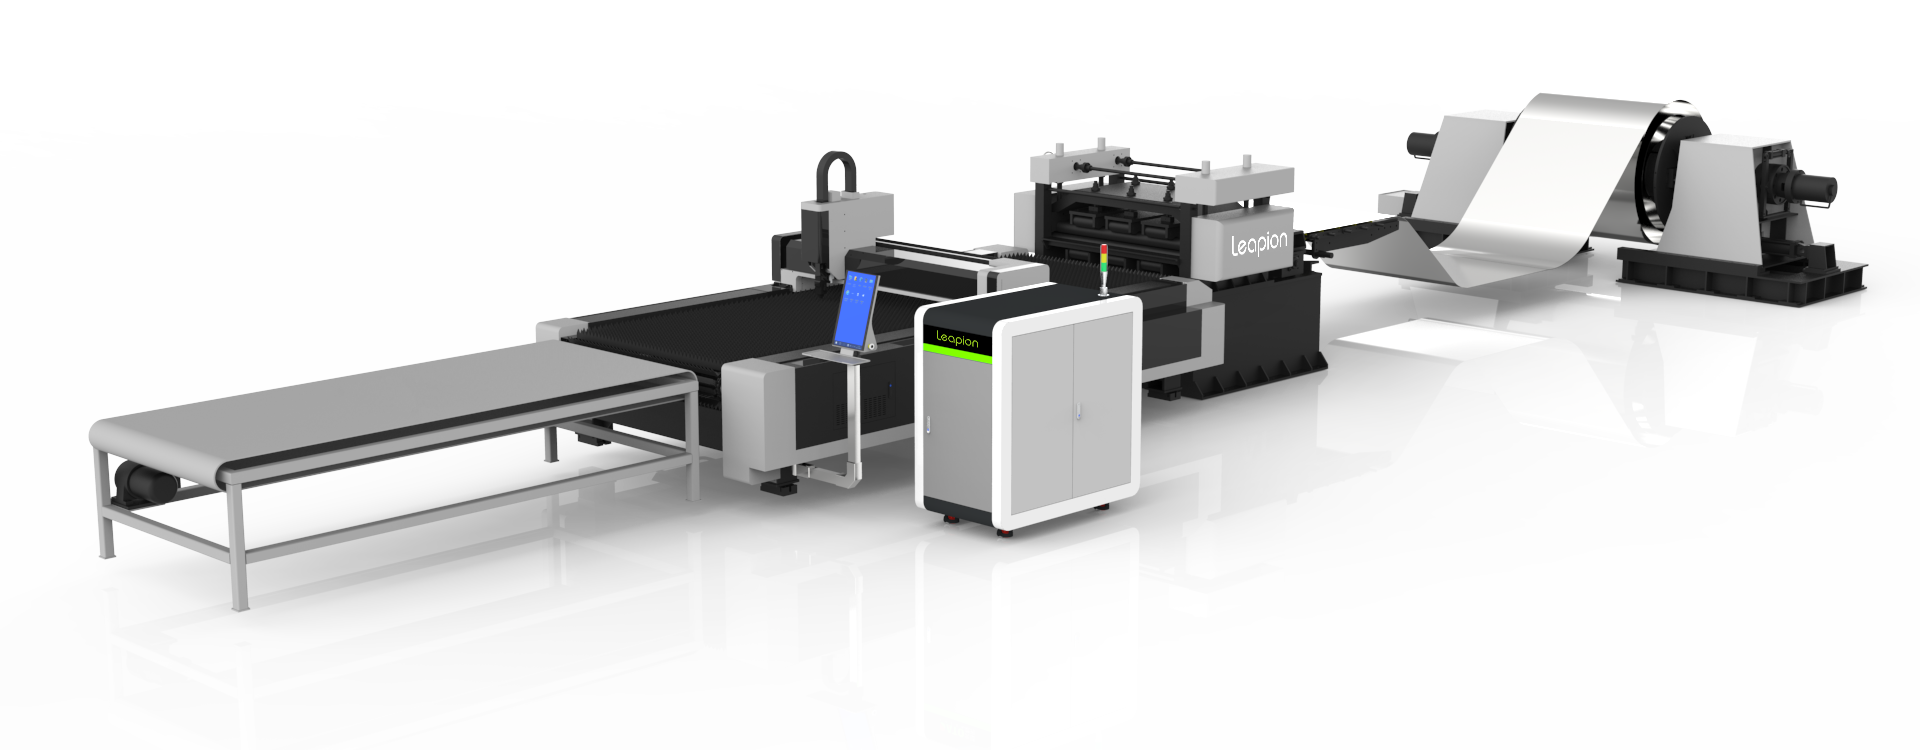 What are the application advantages of intelligent unwinding and leveling laser cutting machine?